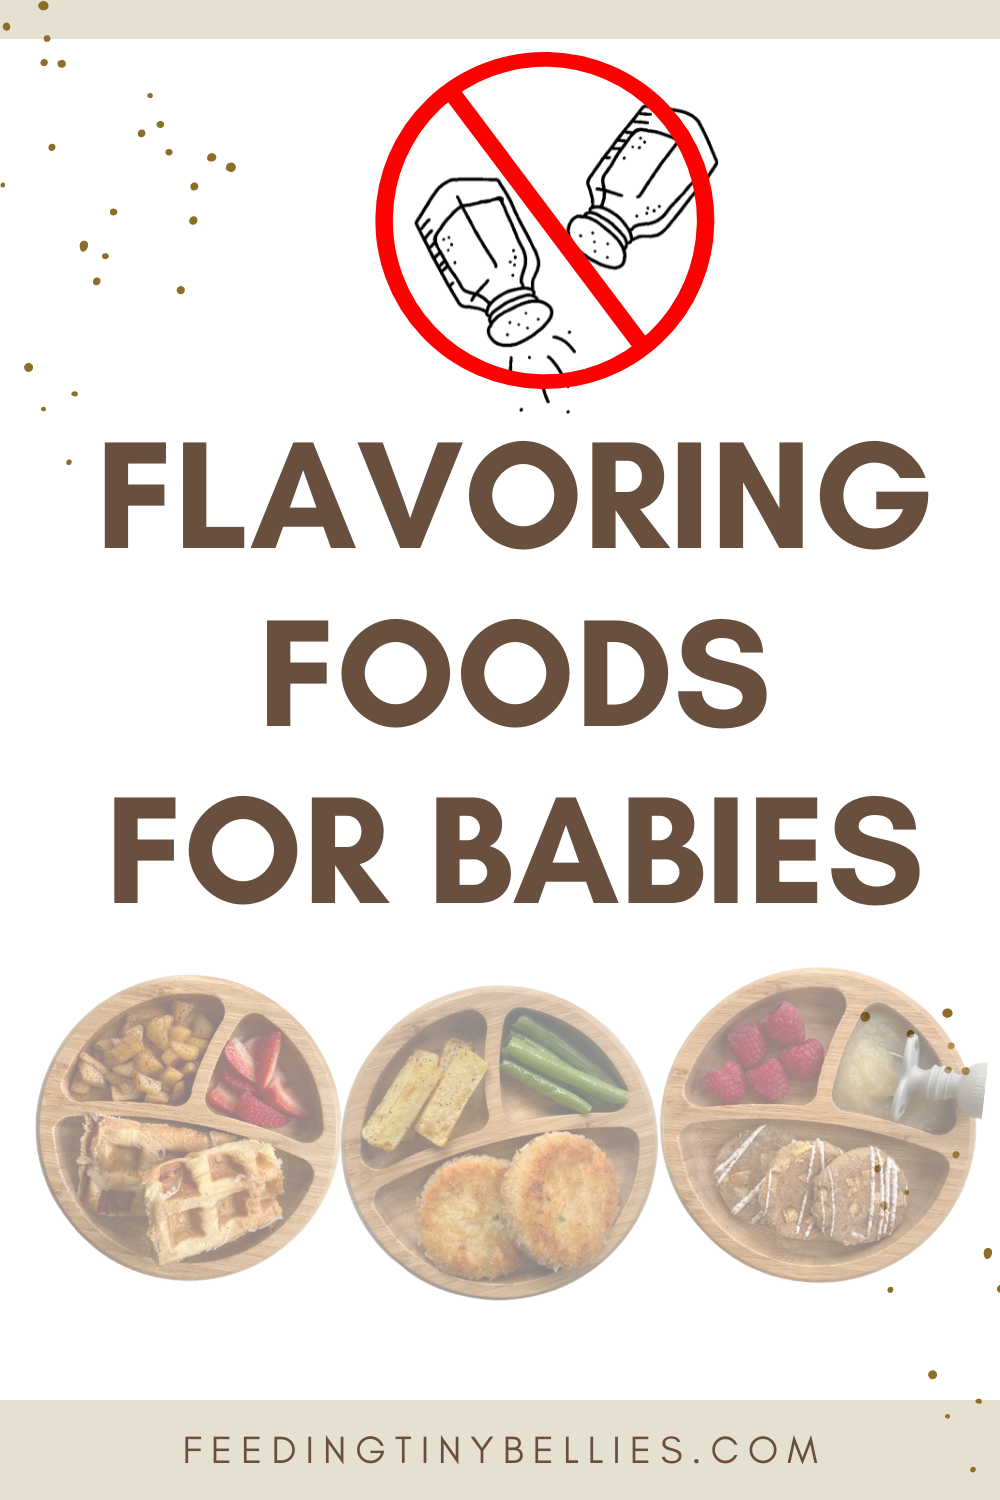 Flavoring foods for babies